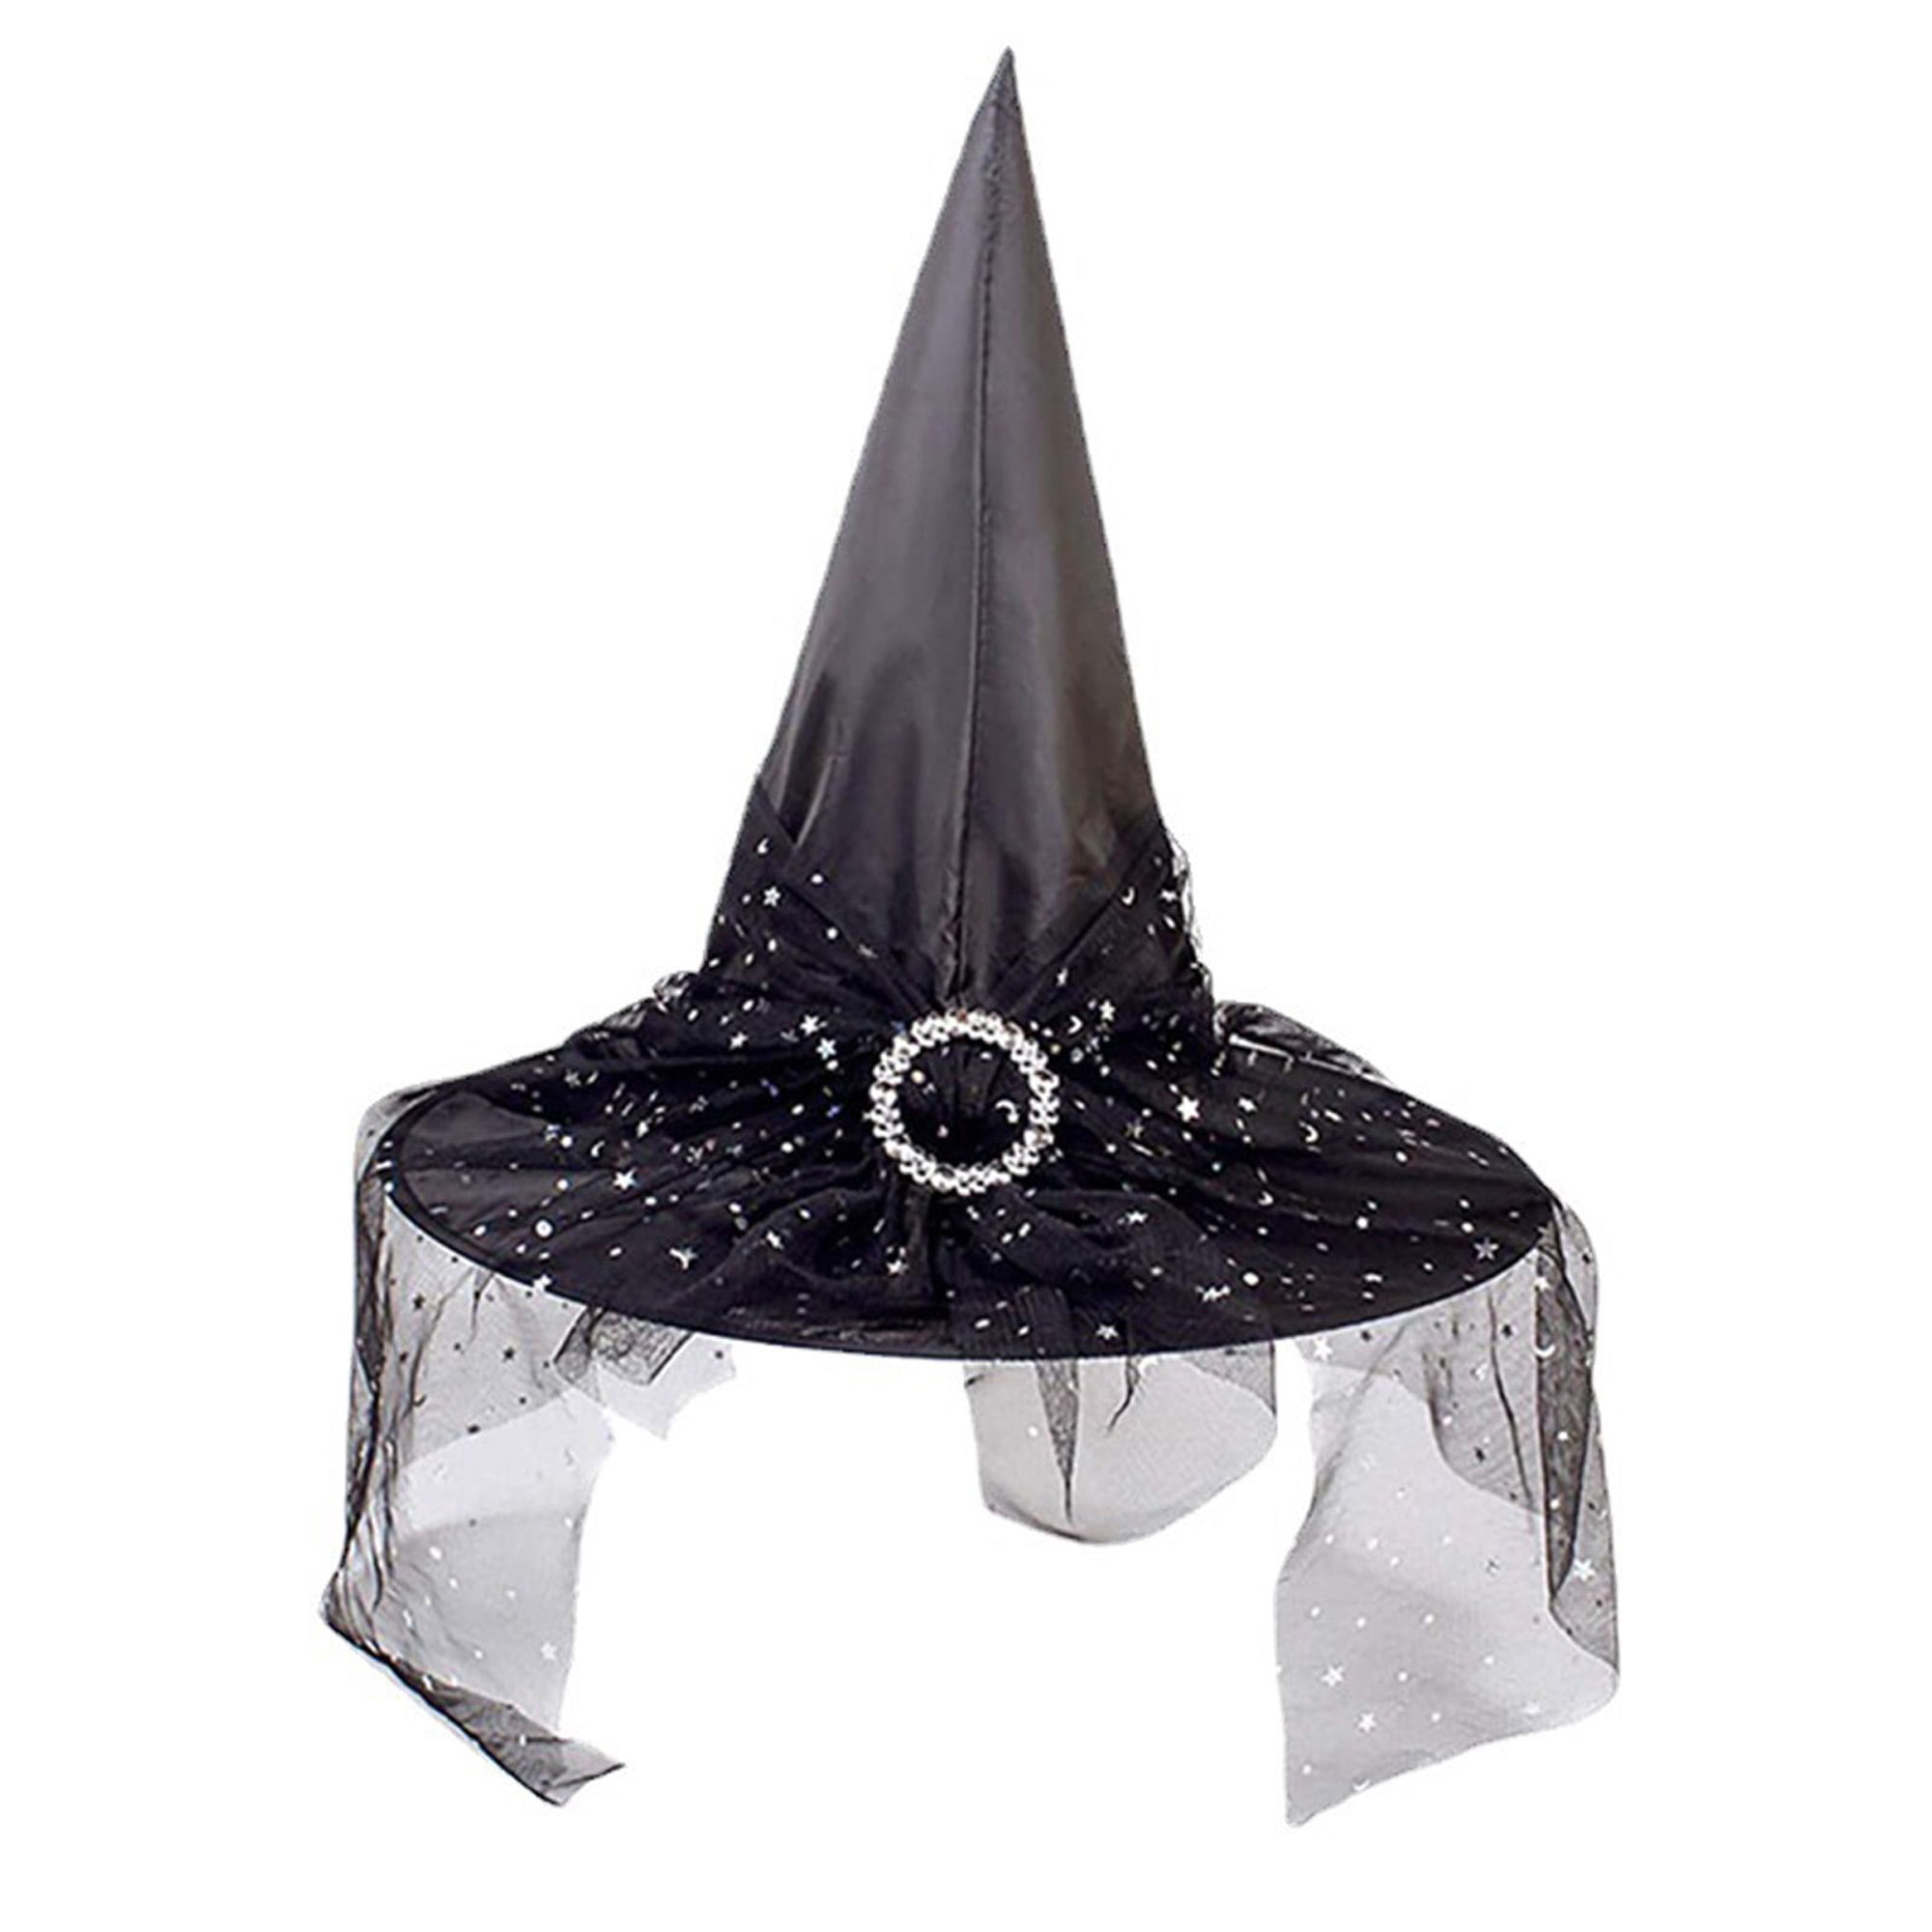 See-through Lace Veils Printed Hats Party Supplies Halloween Costume Accessories Women's Halloween Vintage Witch Hat 